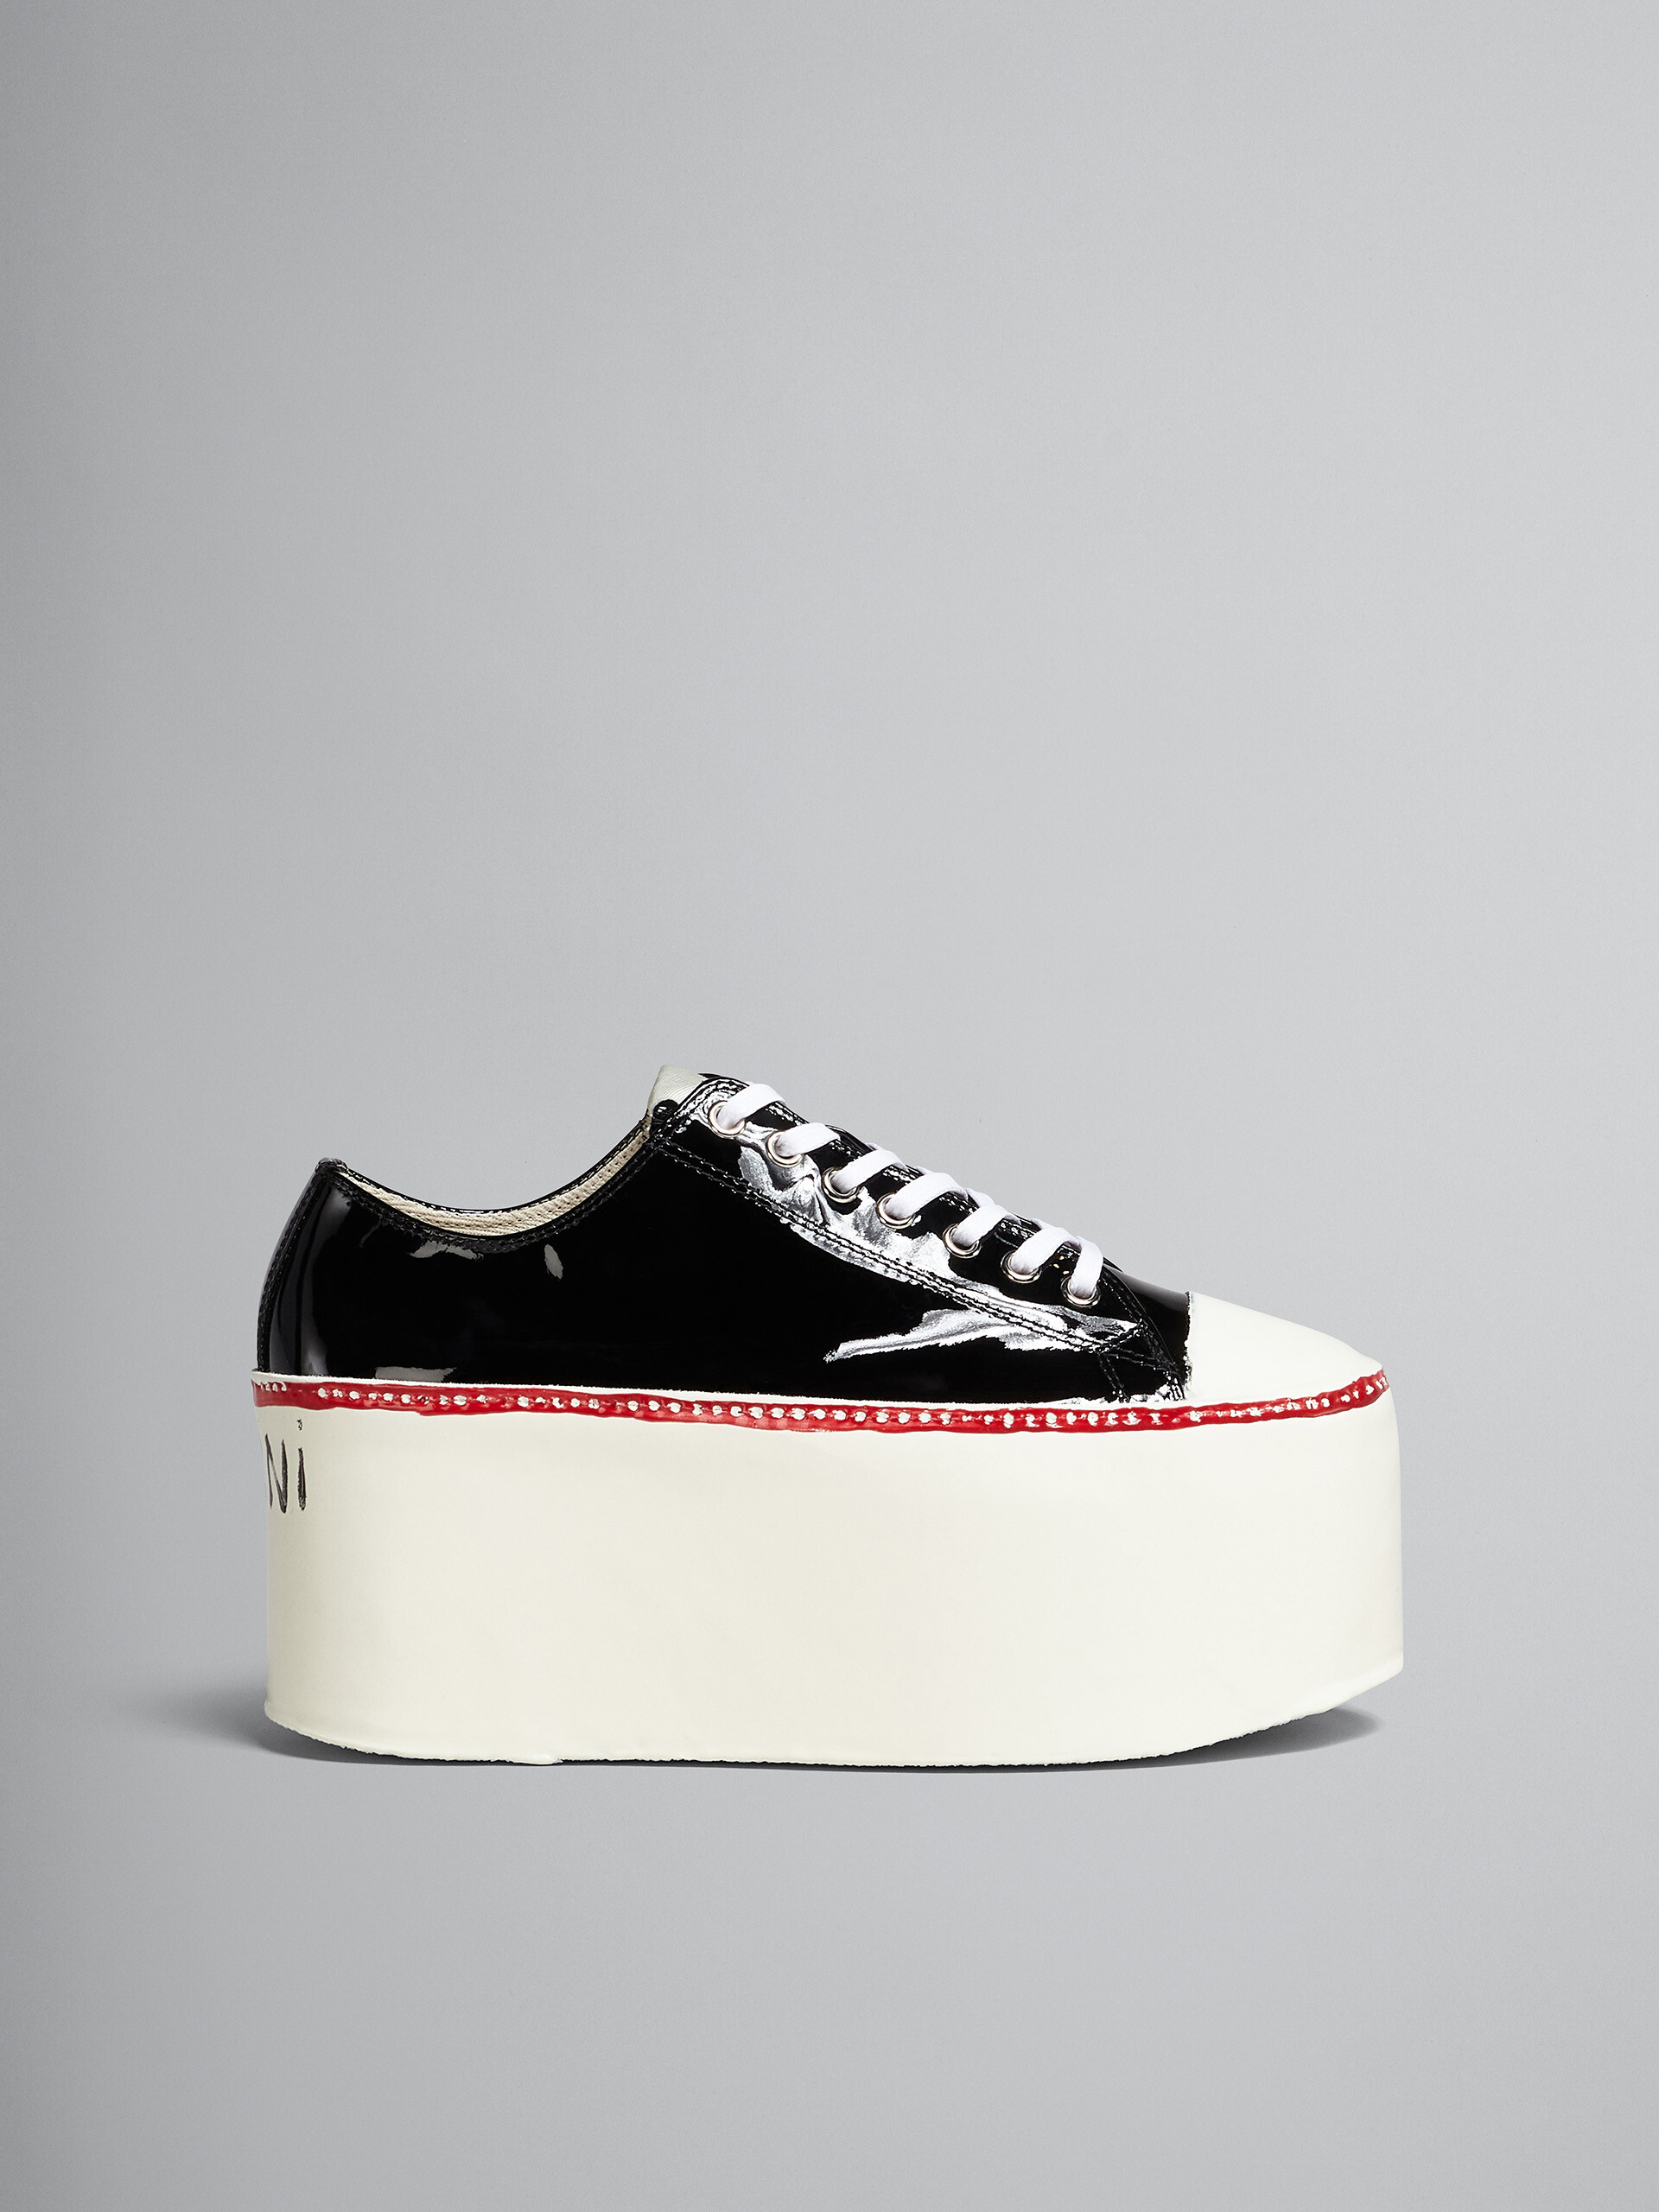 Patent leather platform sneaker - Sneakers - Image 1